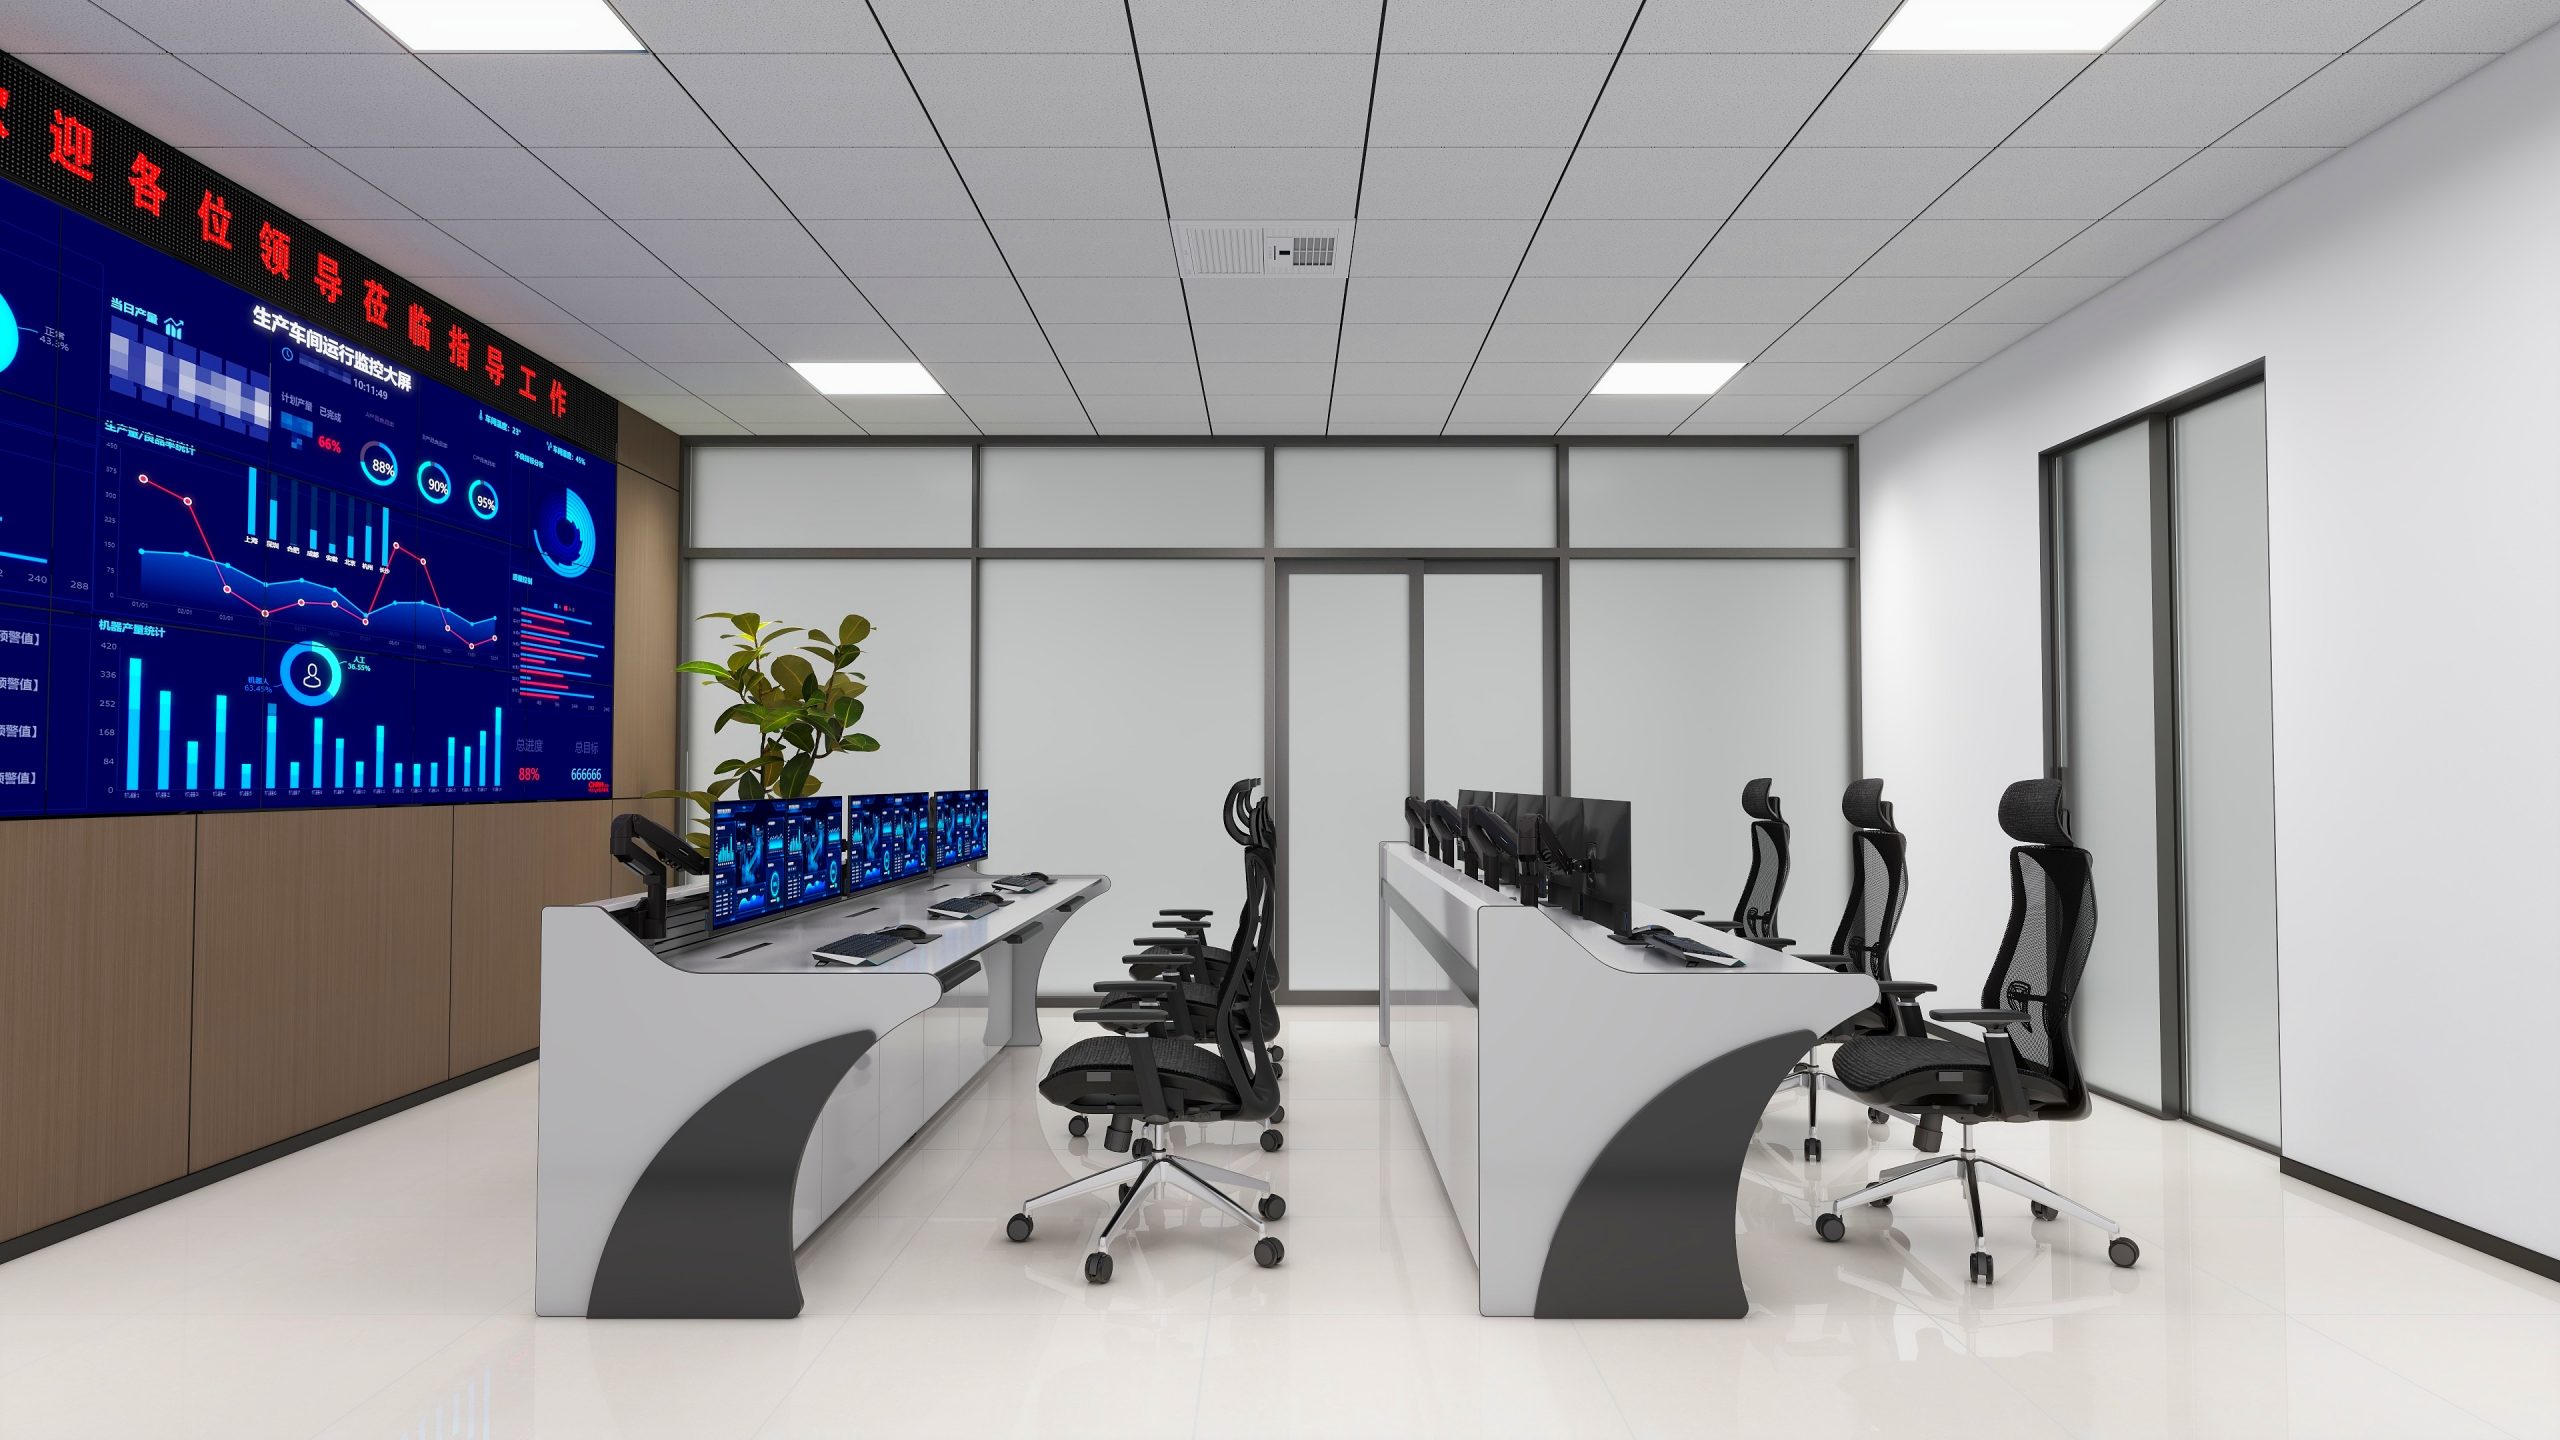 UDWEN Embraces Evolution in Control Console: Can Your Control Room’s Lighting Design and Usage Achieve Optimal Performance?